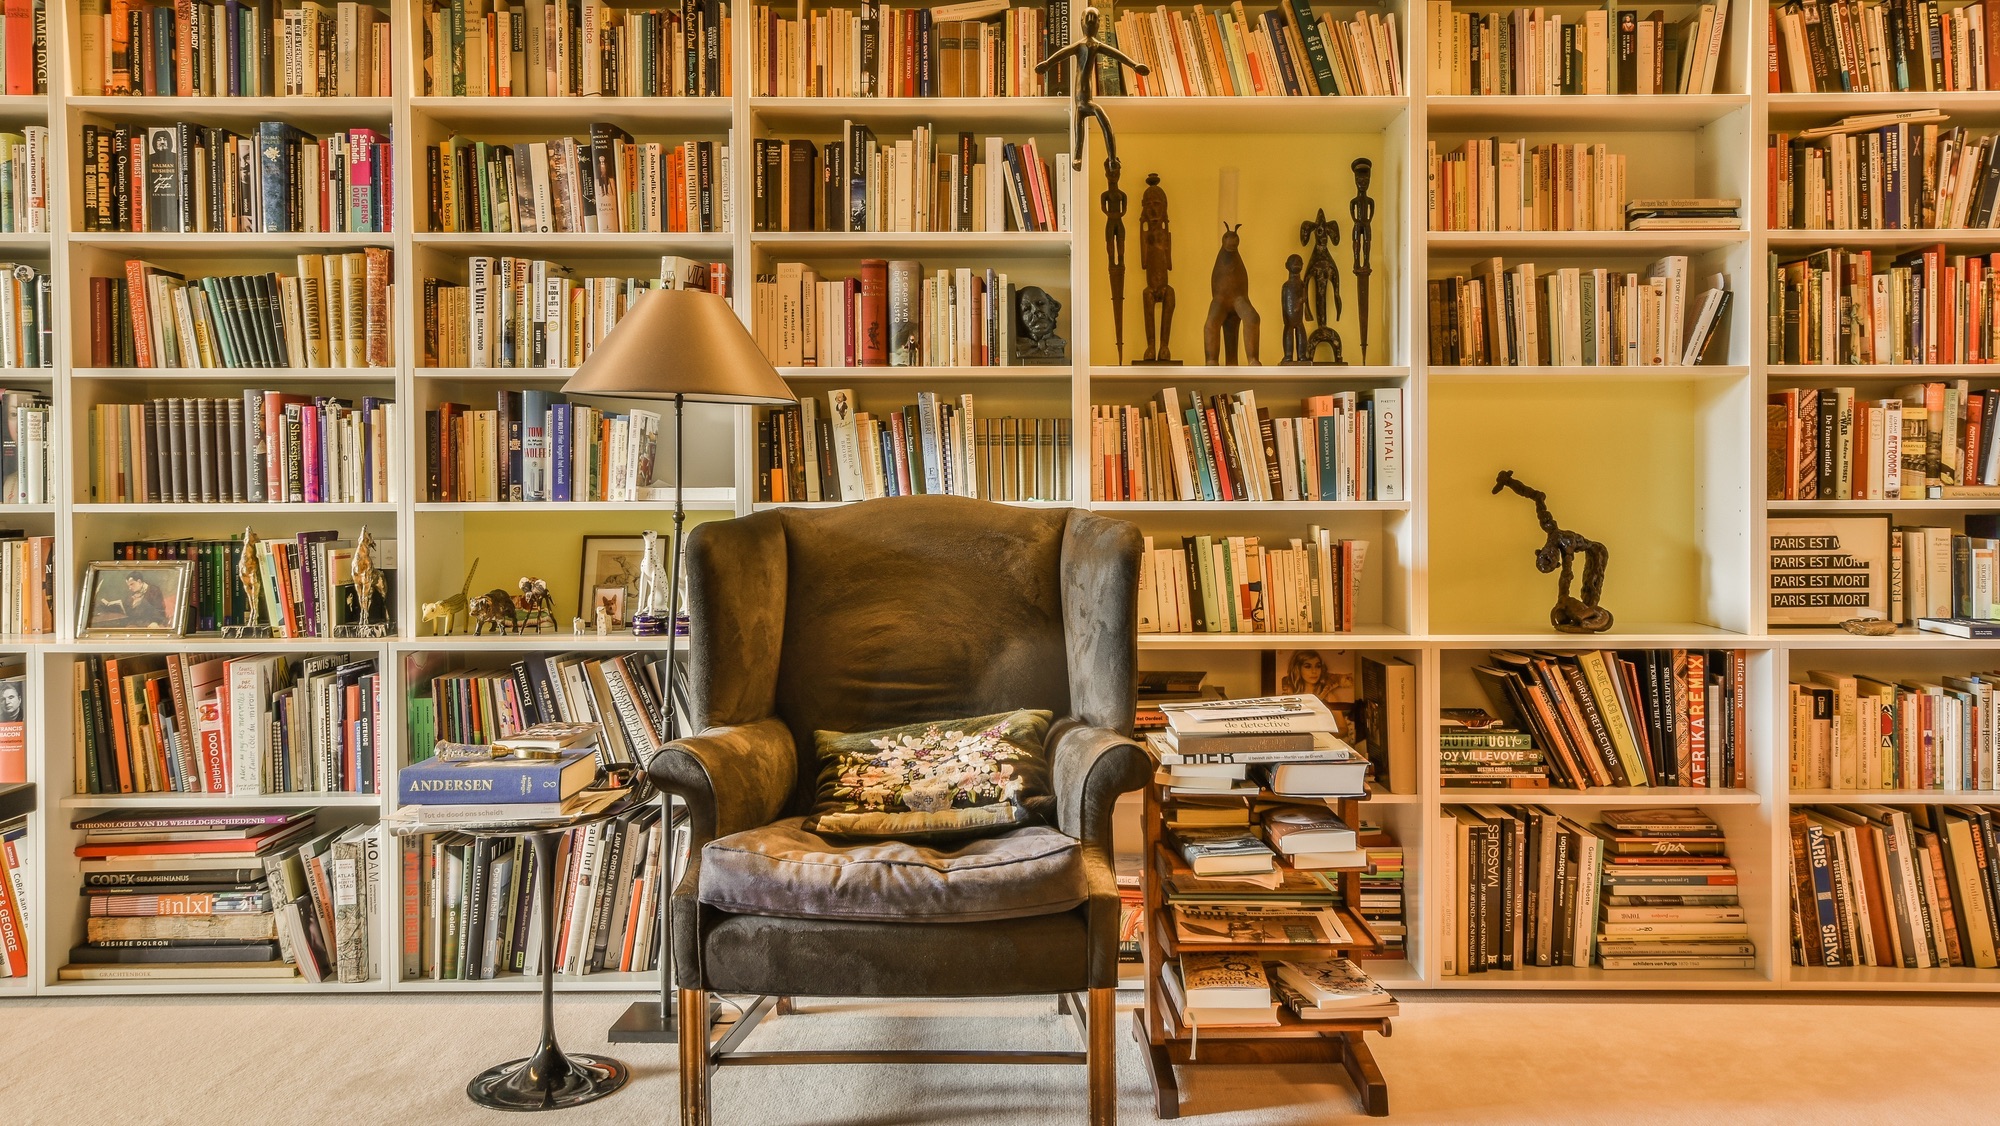 Amsterdam, Netherlands - 10 April, 2021: a chair in front of a book shelf with many books on it and a lamp sitting next to the chair